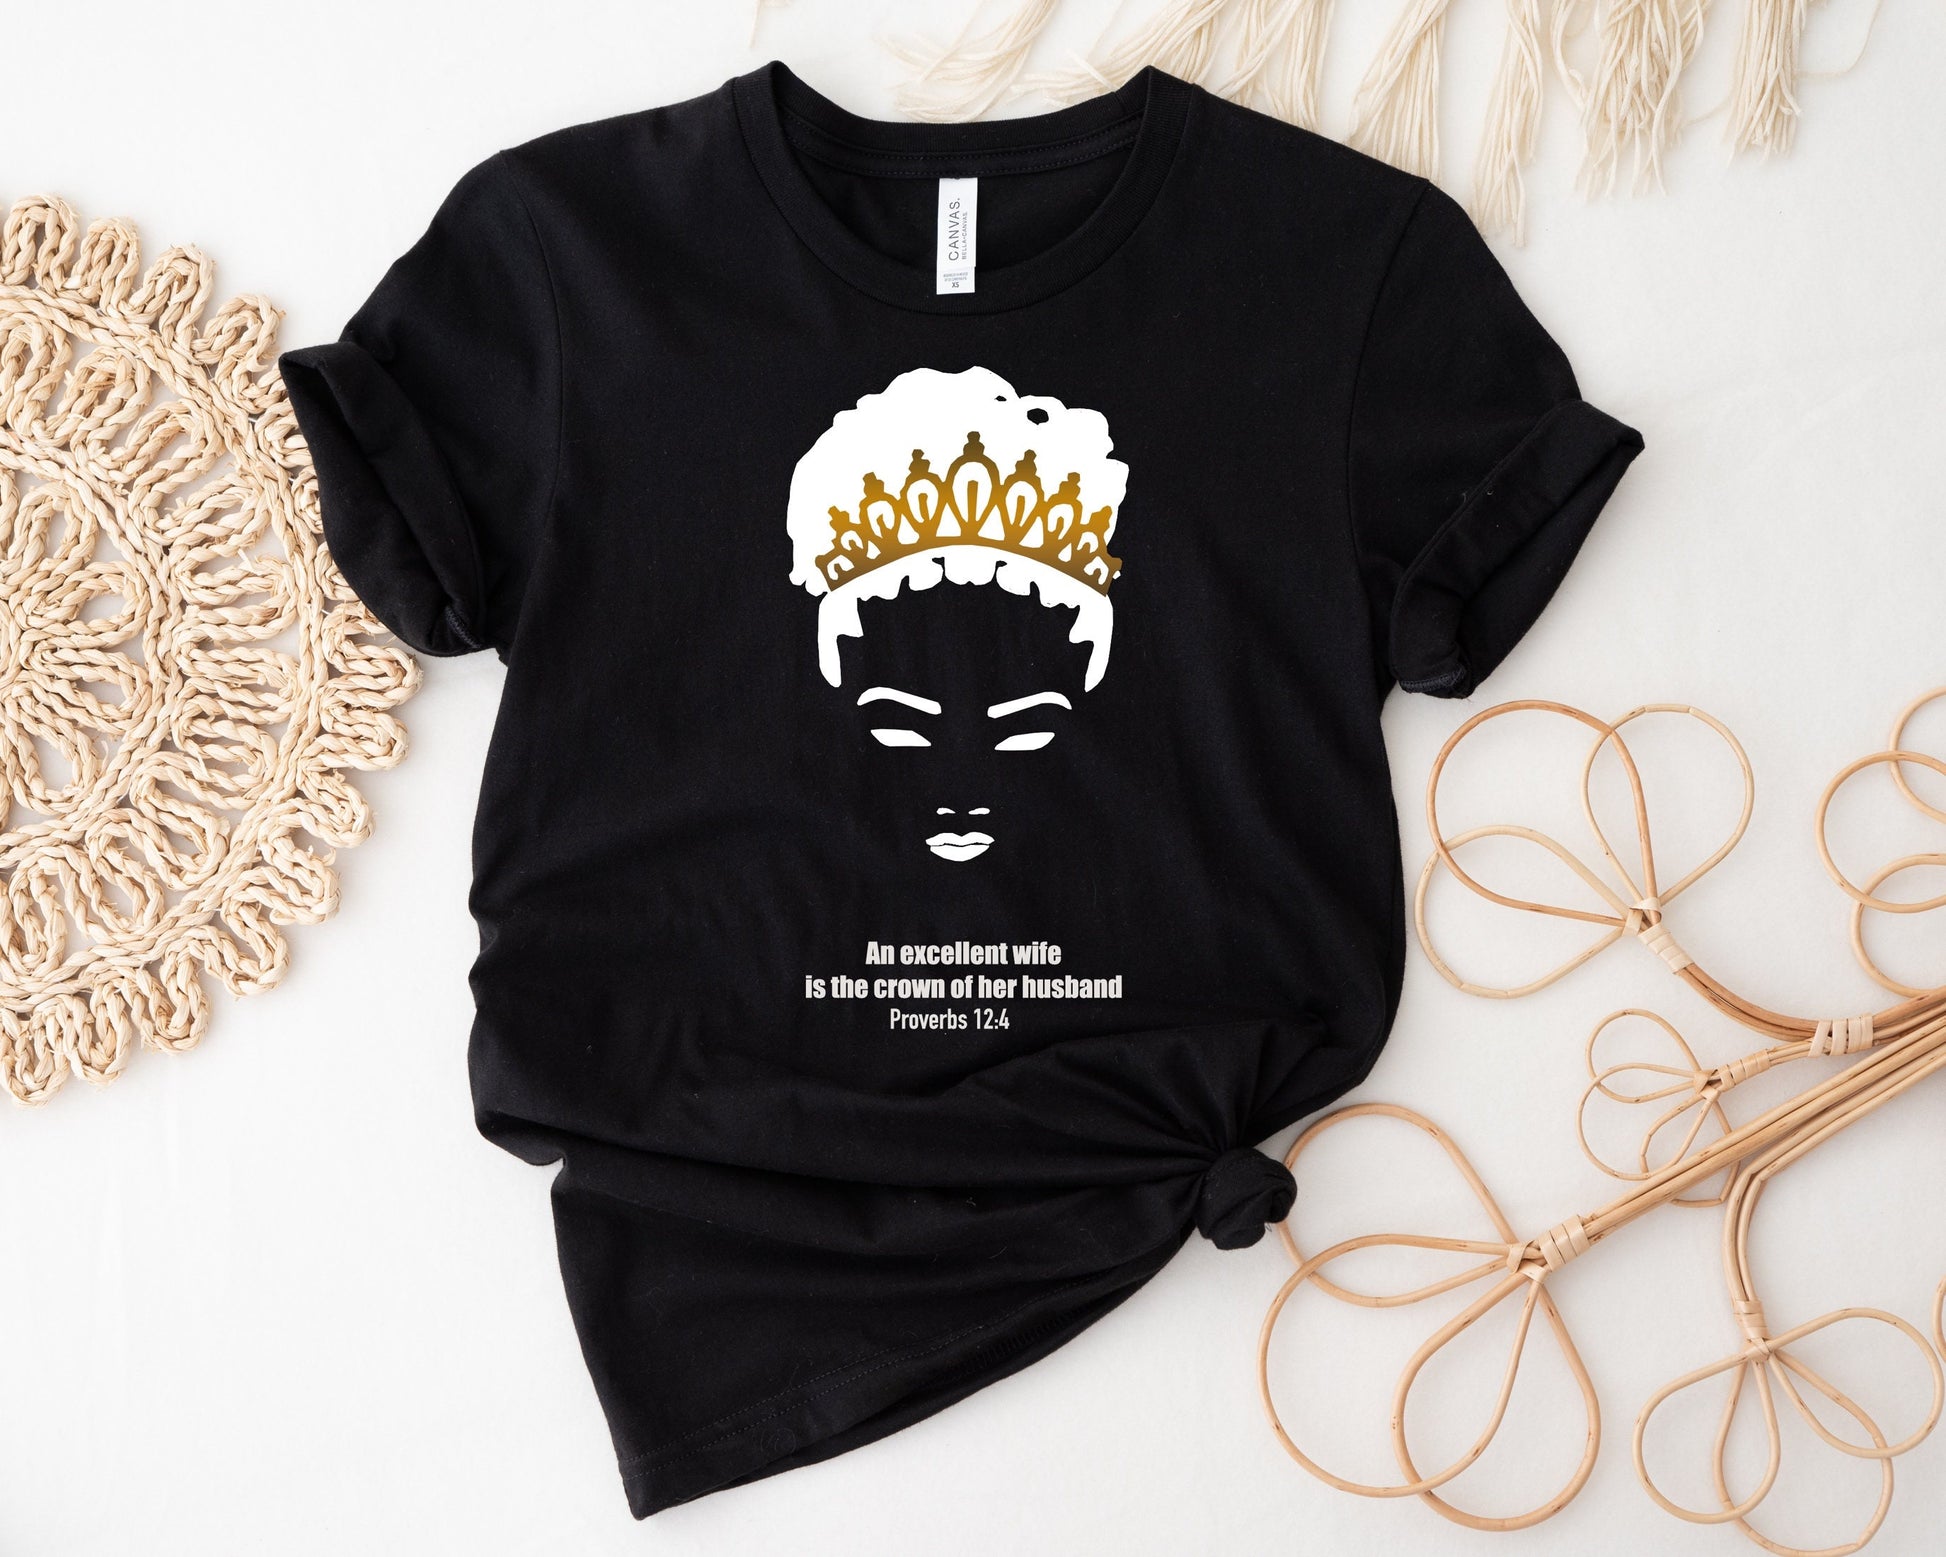 Women's day, queen, celebrate her, King and Queen Matching Shirt for C –  GoGoGabby